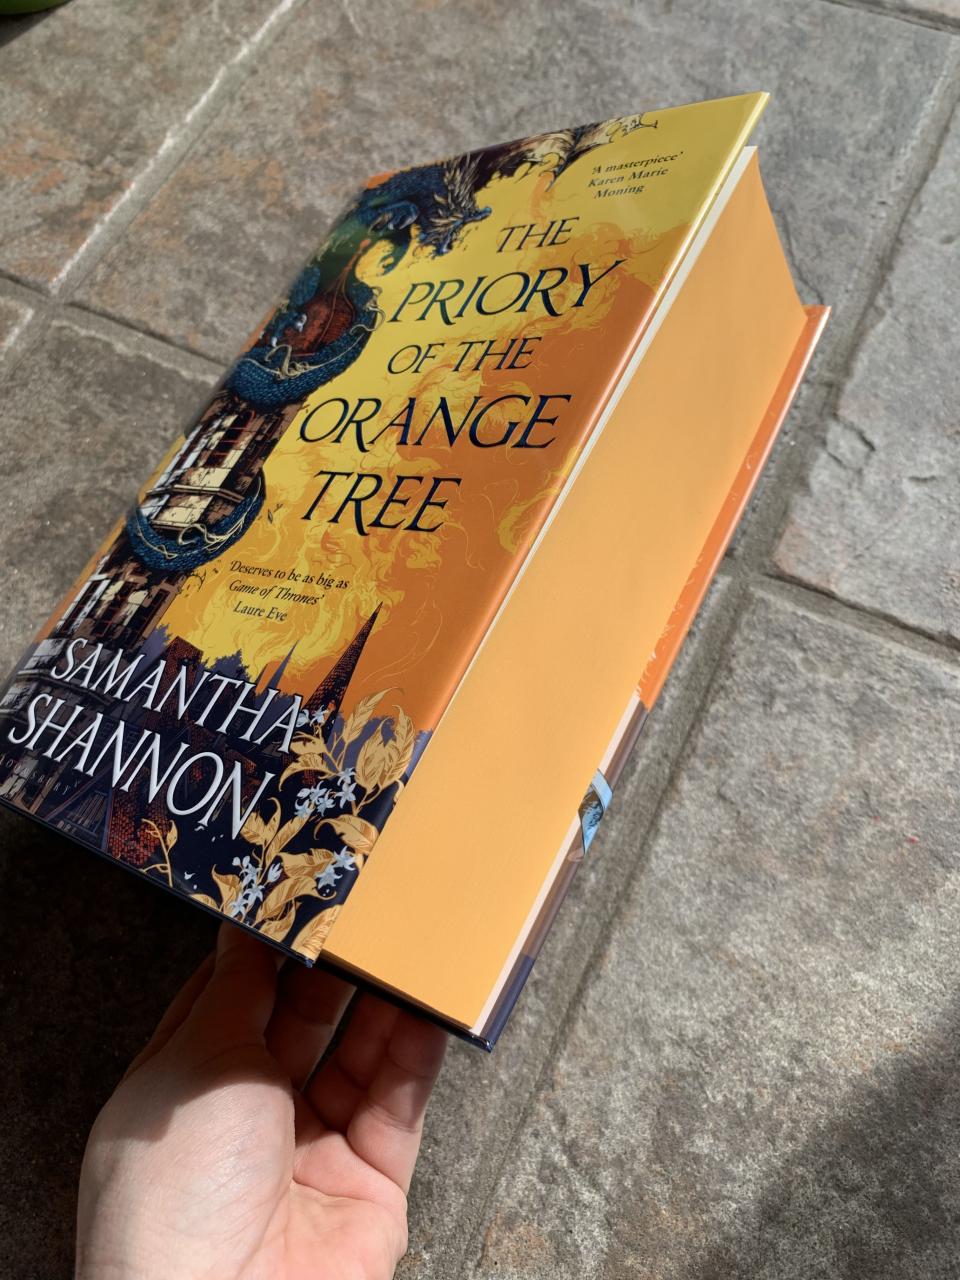 The Priory of the Orange Tree by Samantha Shannon | Book club books ...